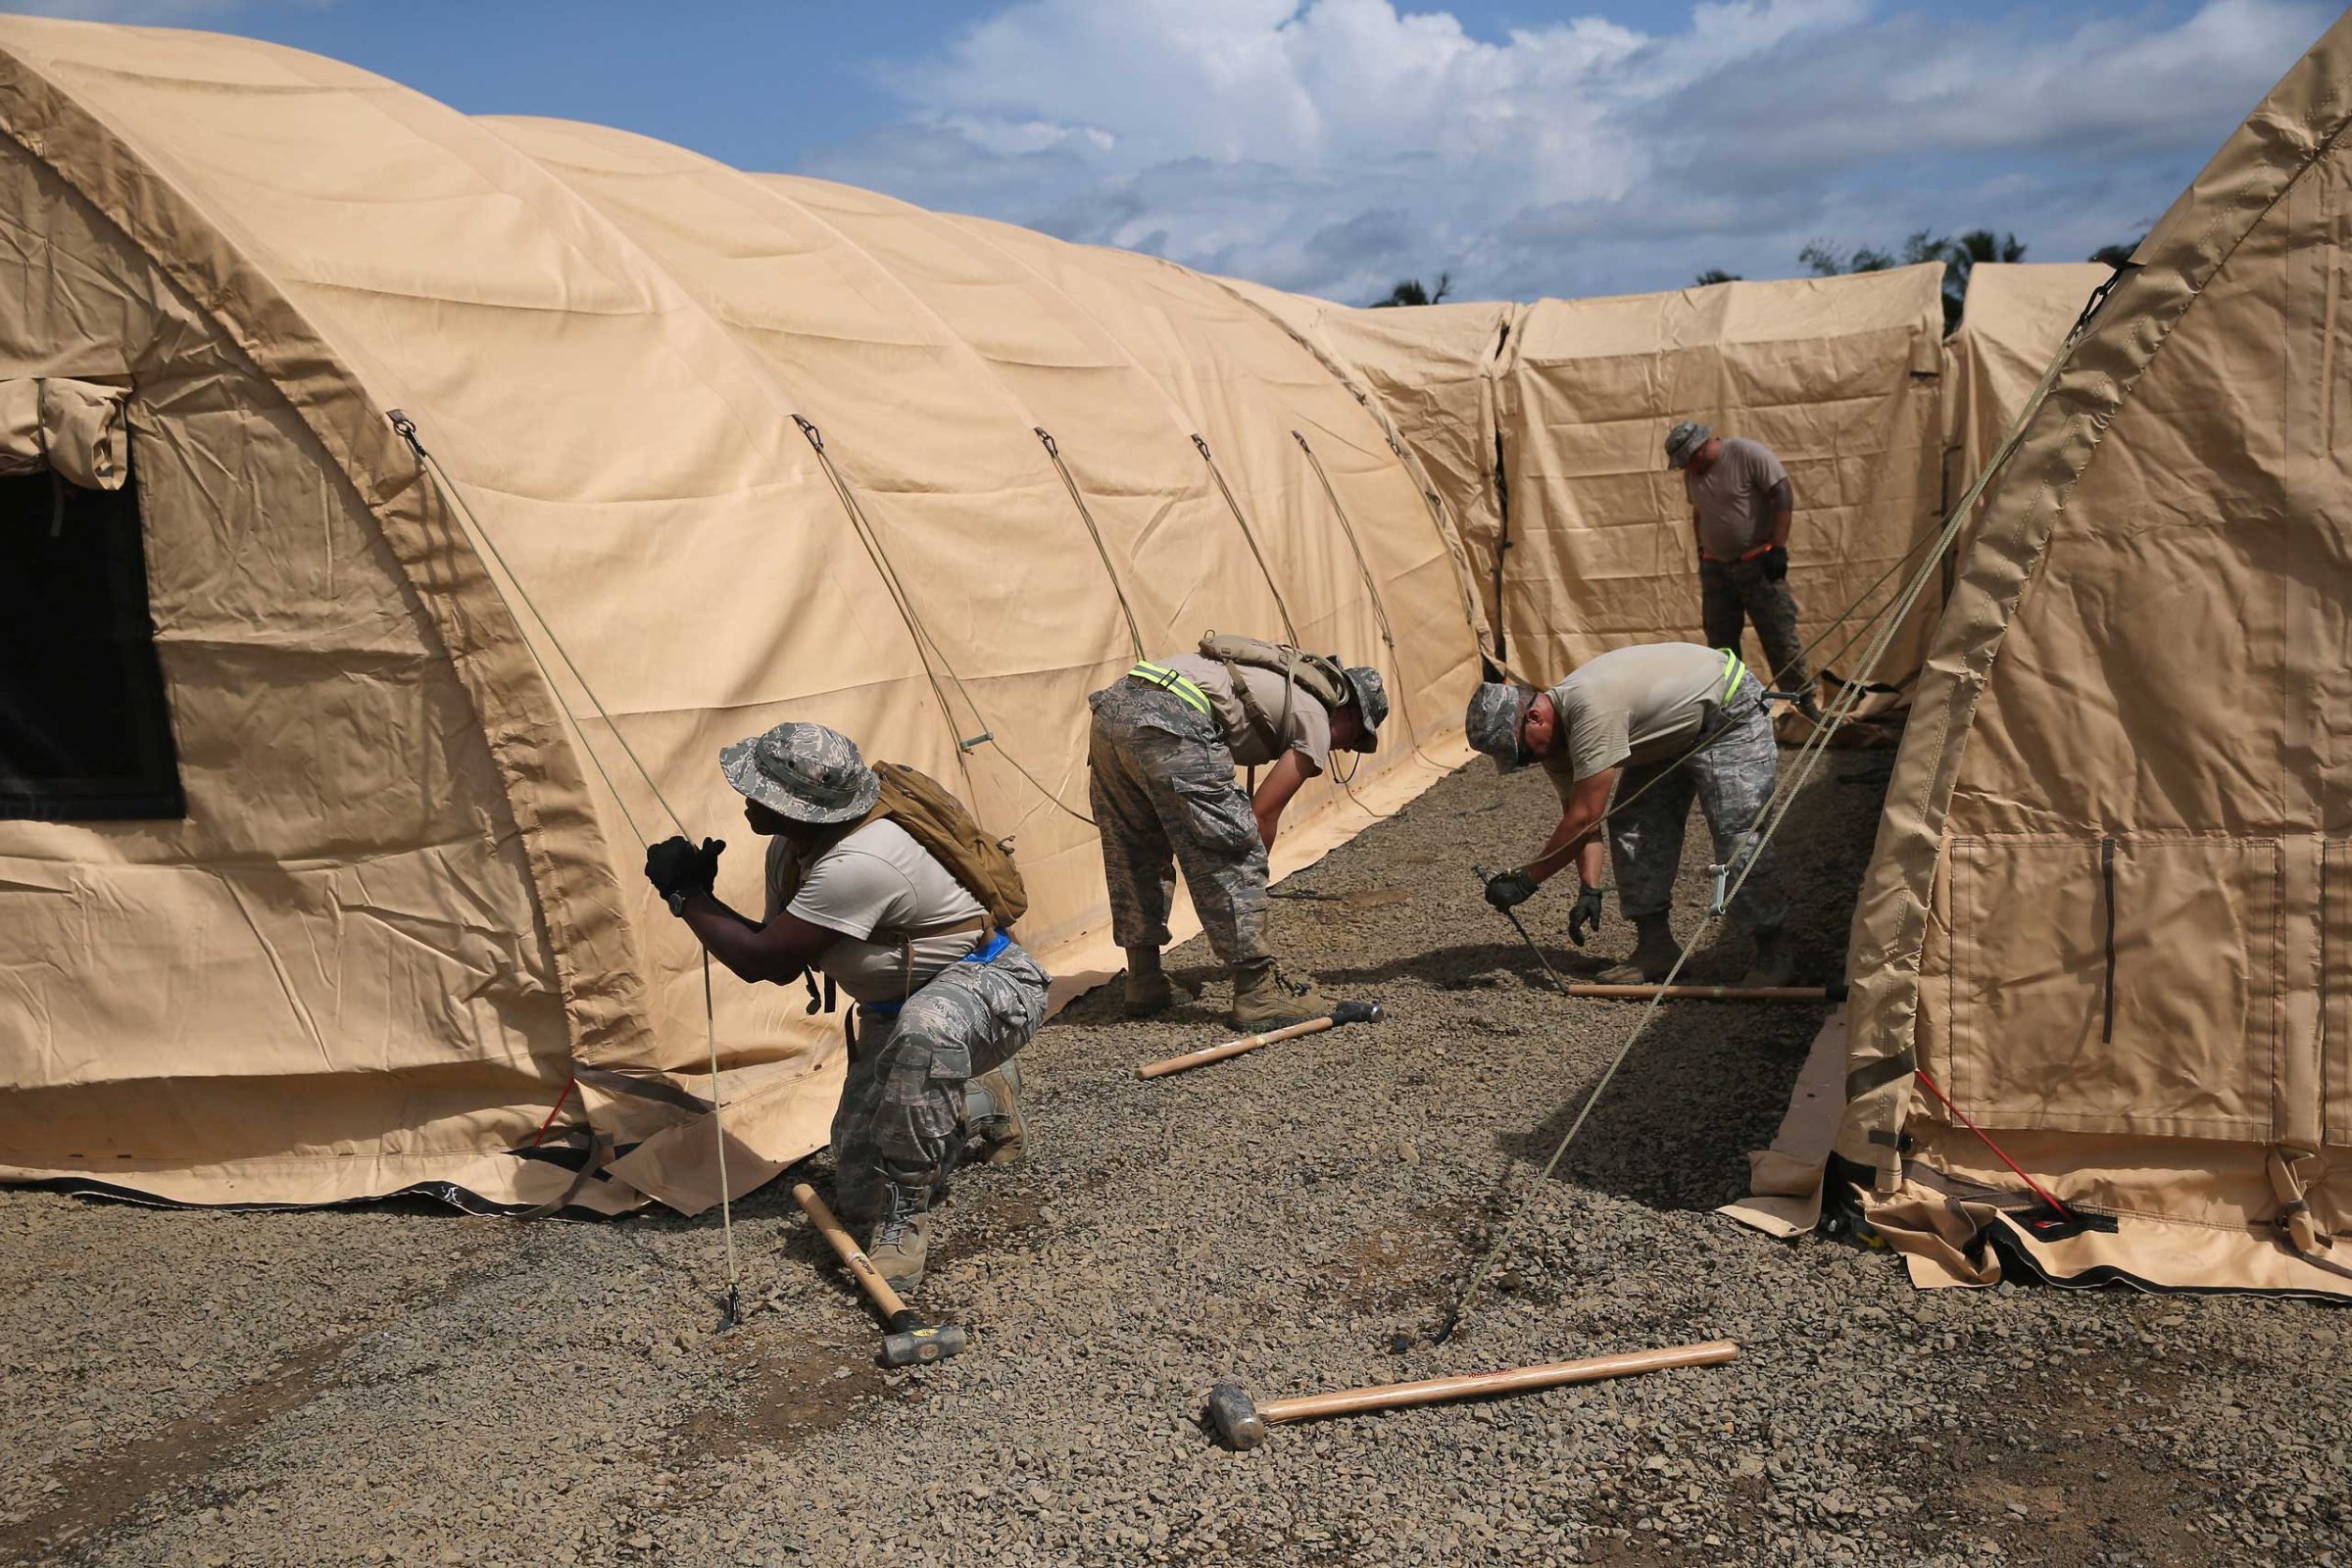 U.S. Air Force personnel put up tents to house a 25-bed U.S.-built hospital for sick Liberian health workers as part in Operation United Assistance on Oct. 9, 2014 in Monrovia, Liberia.